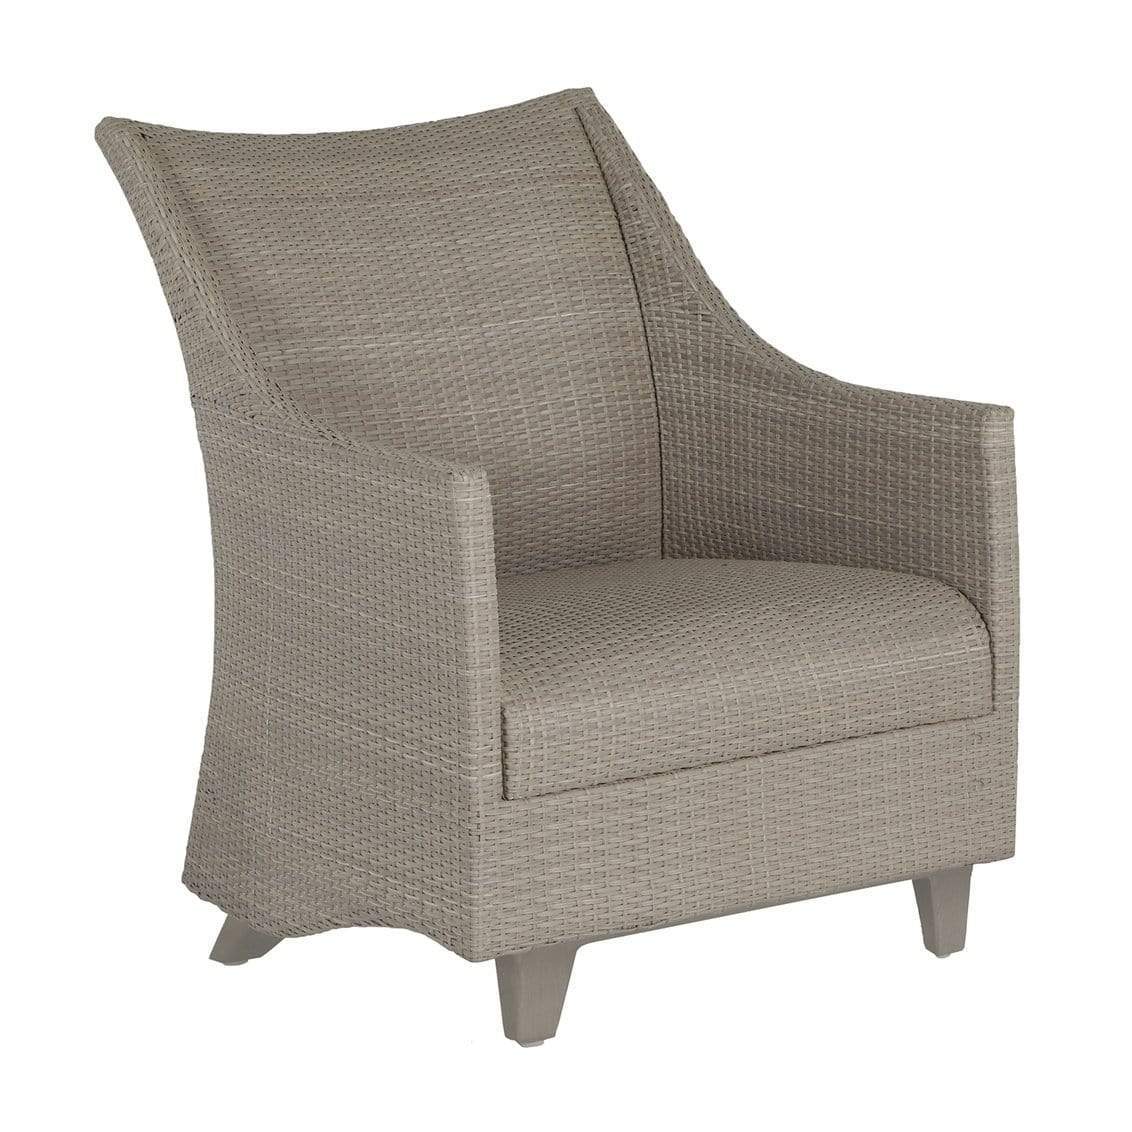 Summer Classics Athena Woven Spring Lounge Chair Furniture summer-classics-387324